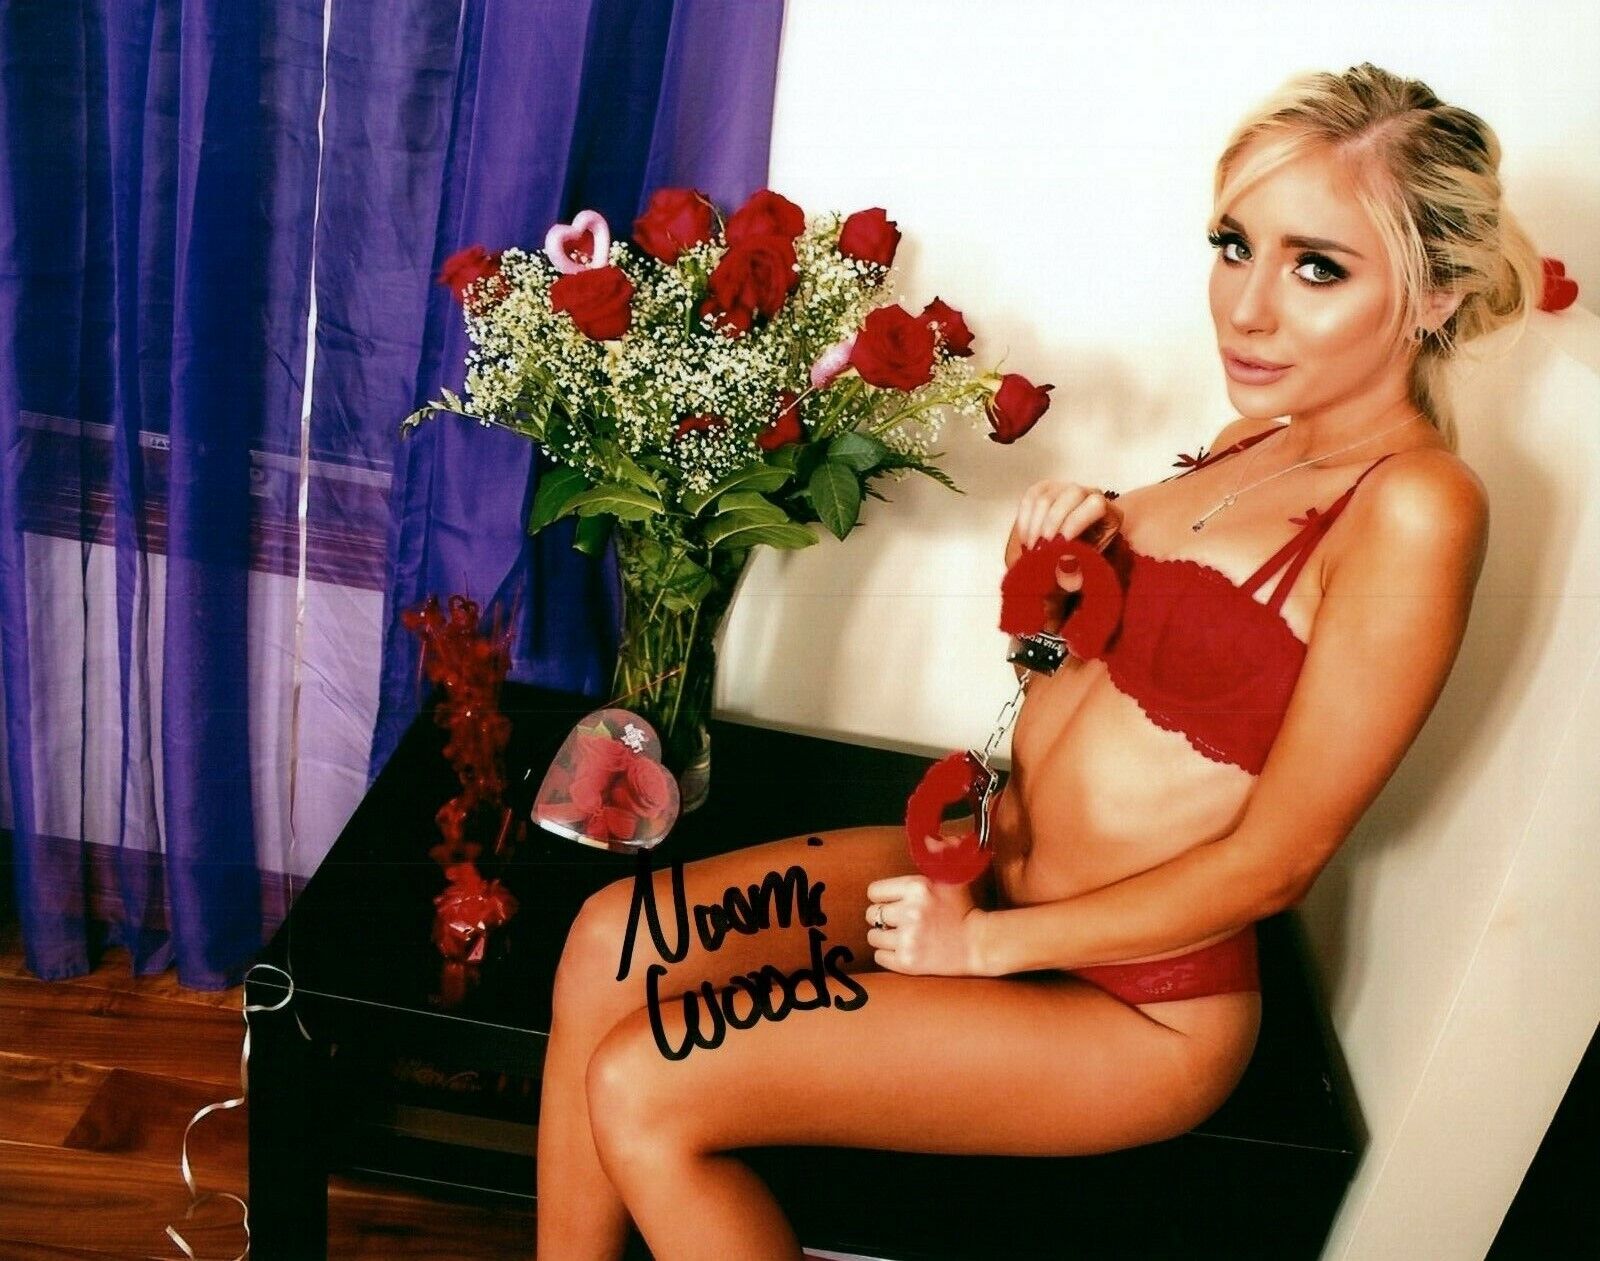 Naomi Woods Super Sexy Hott Adult Model Signed 8x10 Photo Poster painting COA Proof 228